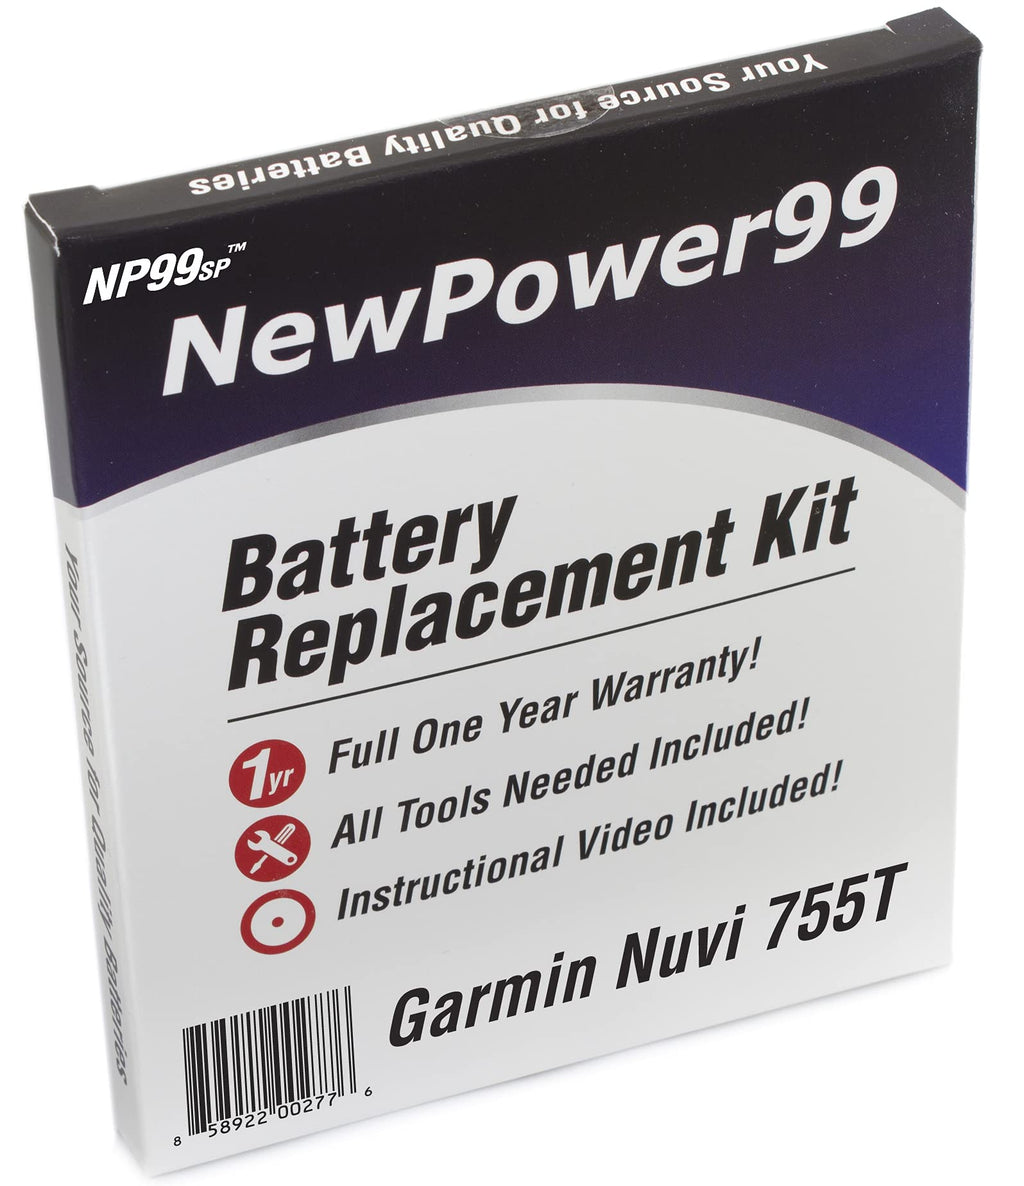 Garmin Nuvi 755T Battery Replacement Kit with Installation Video, Tools, and Extended Life Battery.